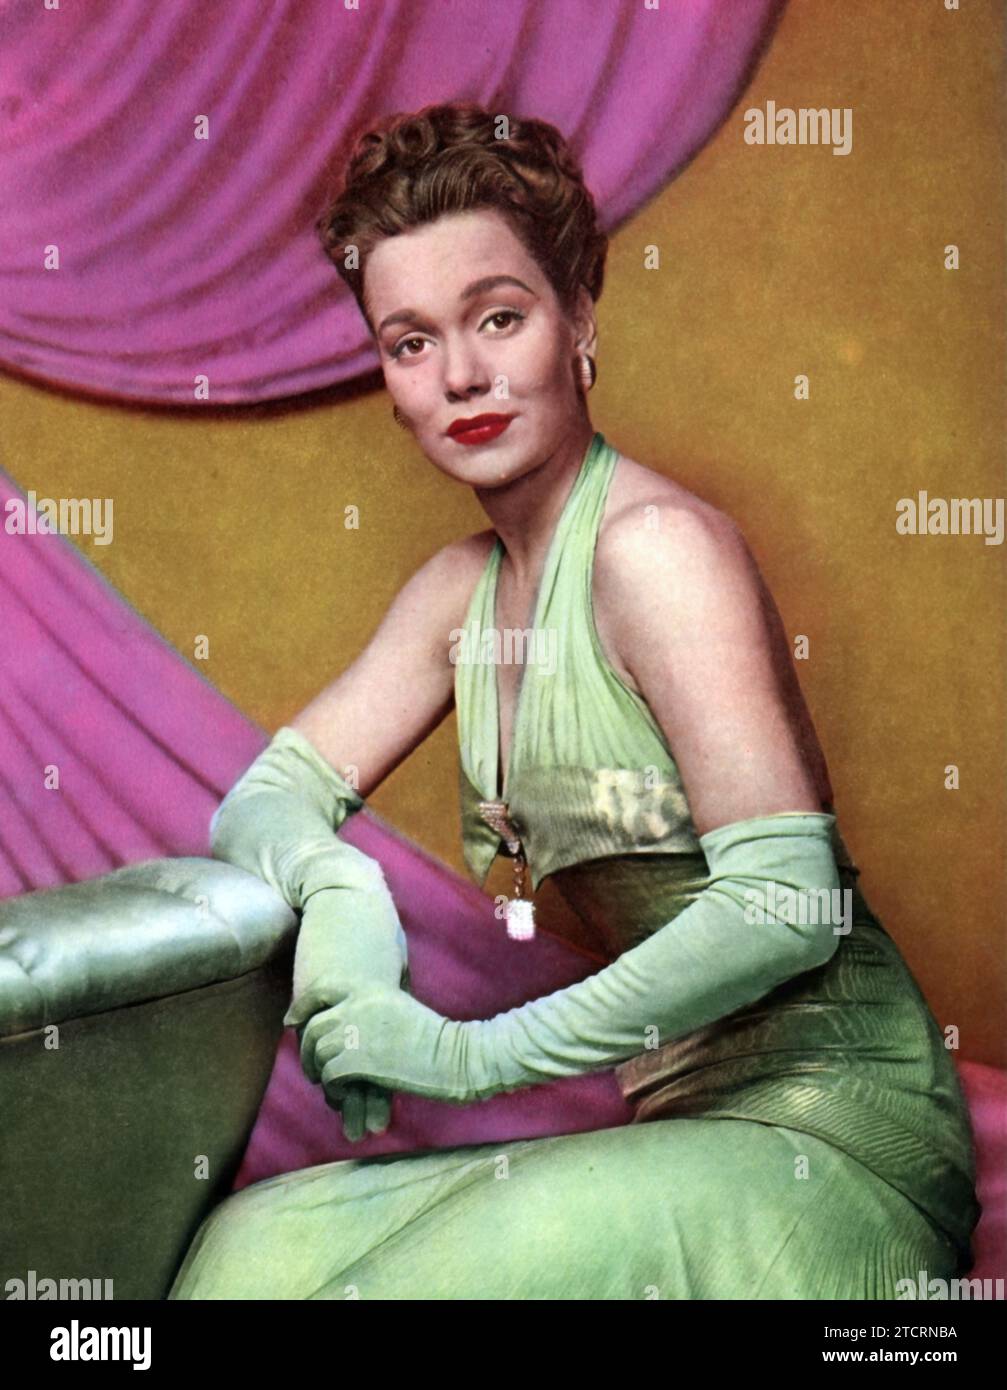 Jane Wyman (born January 5, 1917 – September 10, 2007) stars in 'Night and Day' (1946). This biographical musical film highlights the life of composer Cole Porter. Wyman's career in Hollywood was distinguished by her adaptability and remarkable talent, particularly evident in 'Night and Day'. An Academy Award winner, her legacy in the film industry includes a range of unforgettable performances. Stock Photo